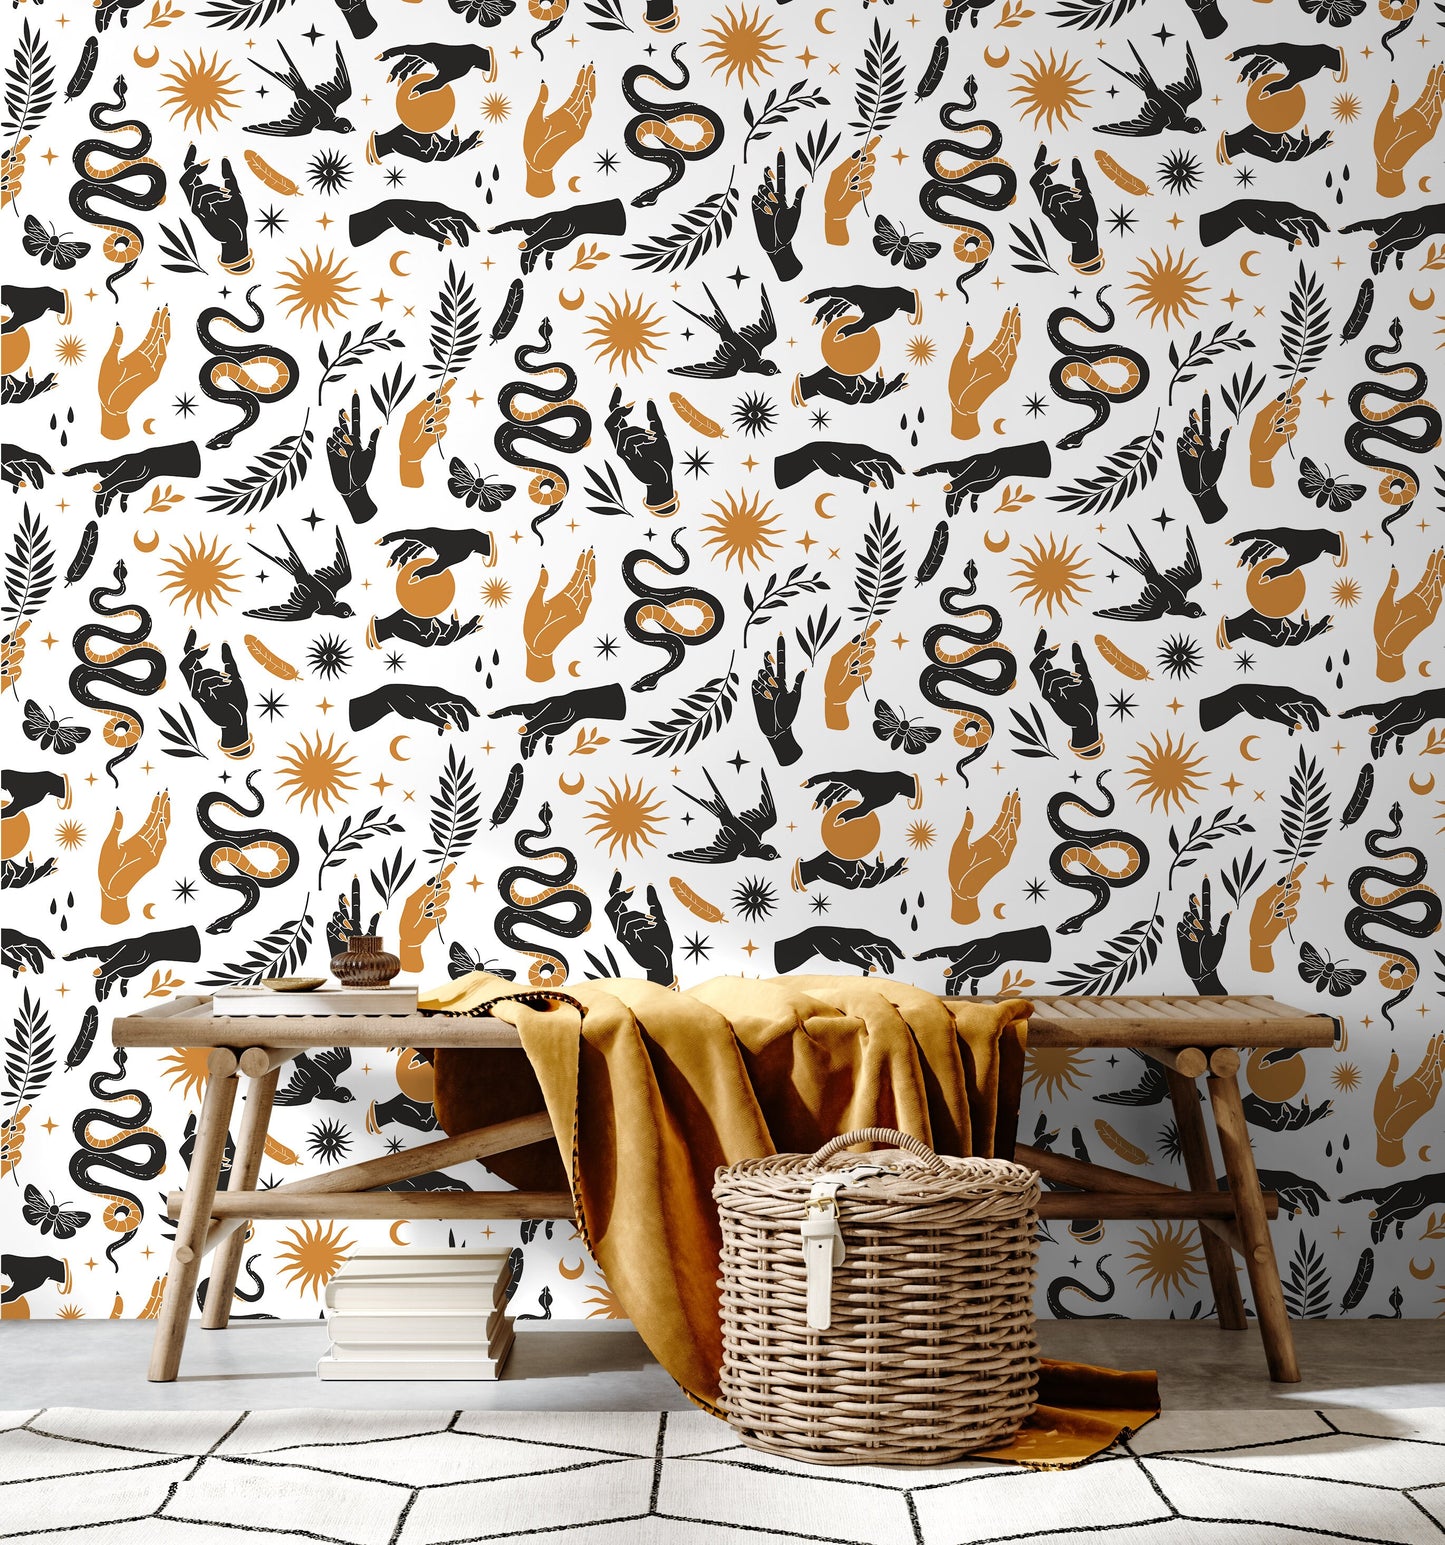 Witch Hand and Snake Wallpaper / Peel and Stick Wallpaper Removable Wallpaper Home Decor Wall Art Wall Decor Room Decor - C715